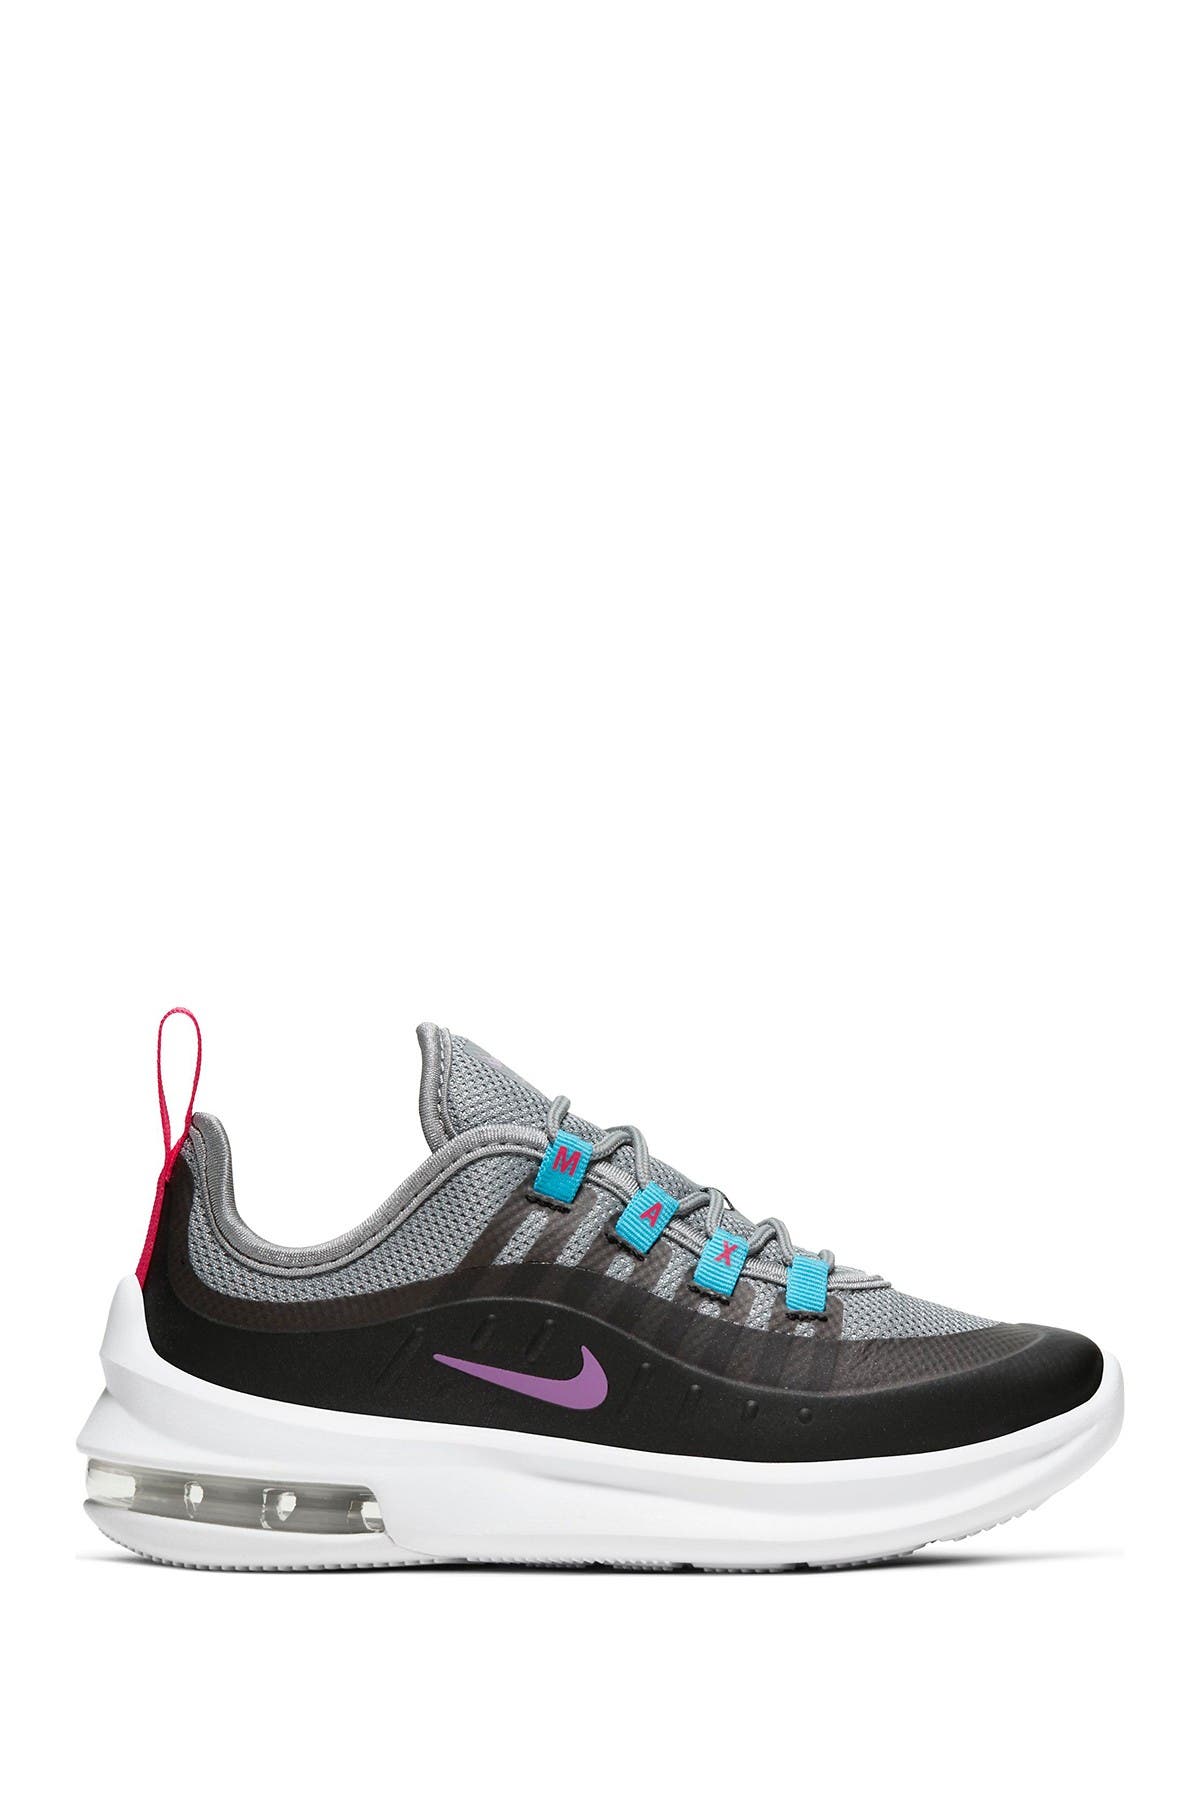 are nike air max axis good for running